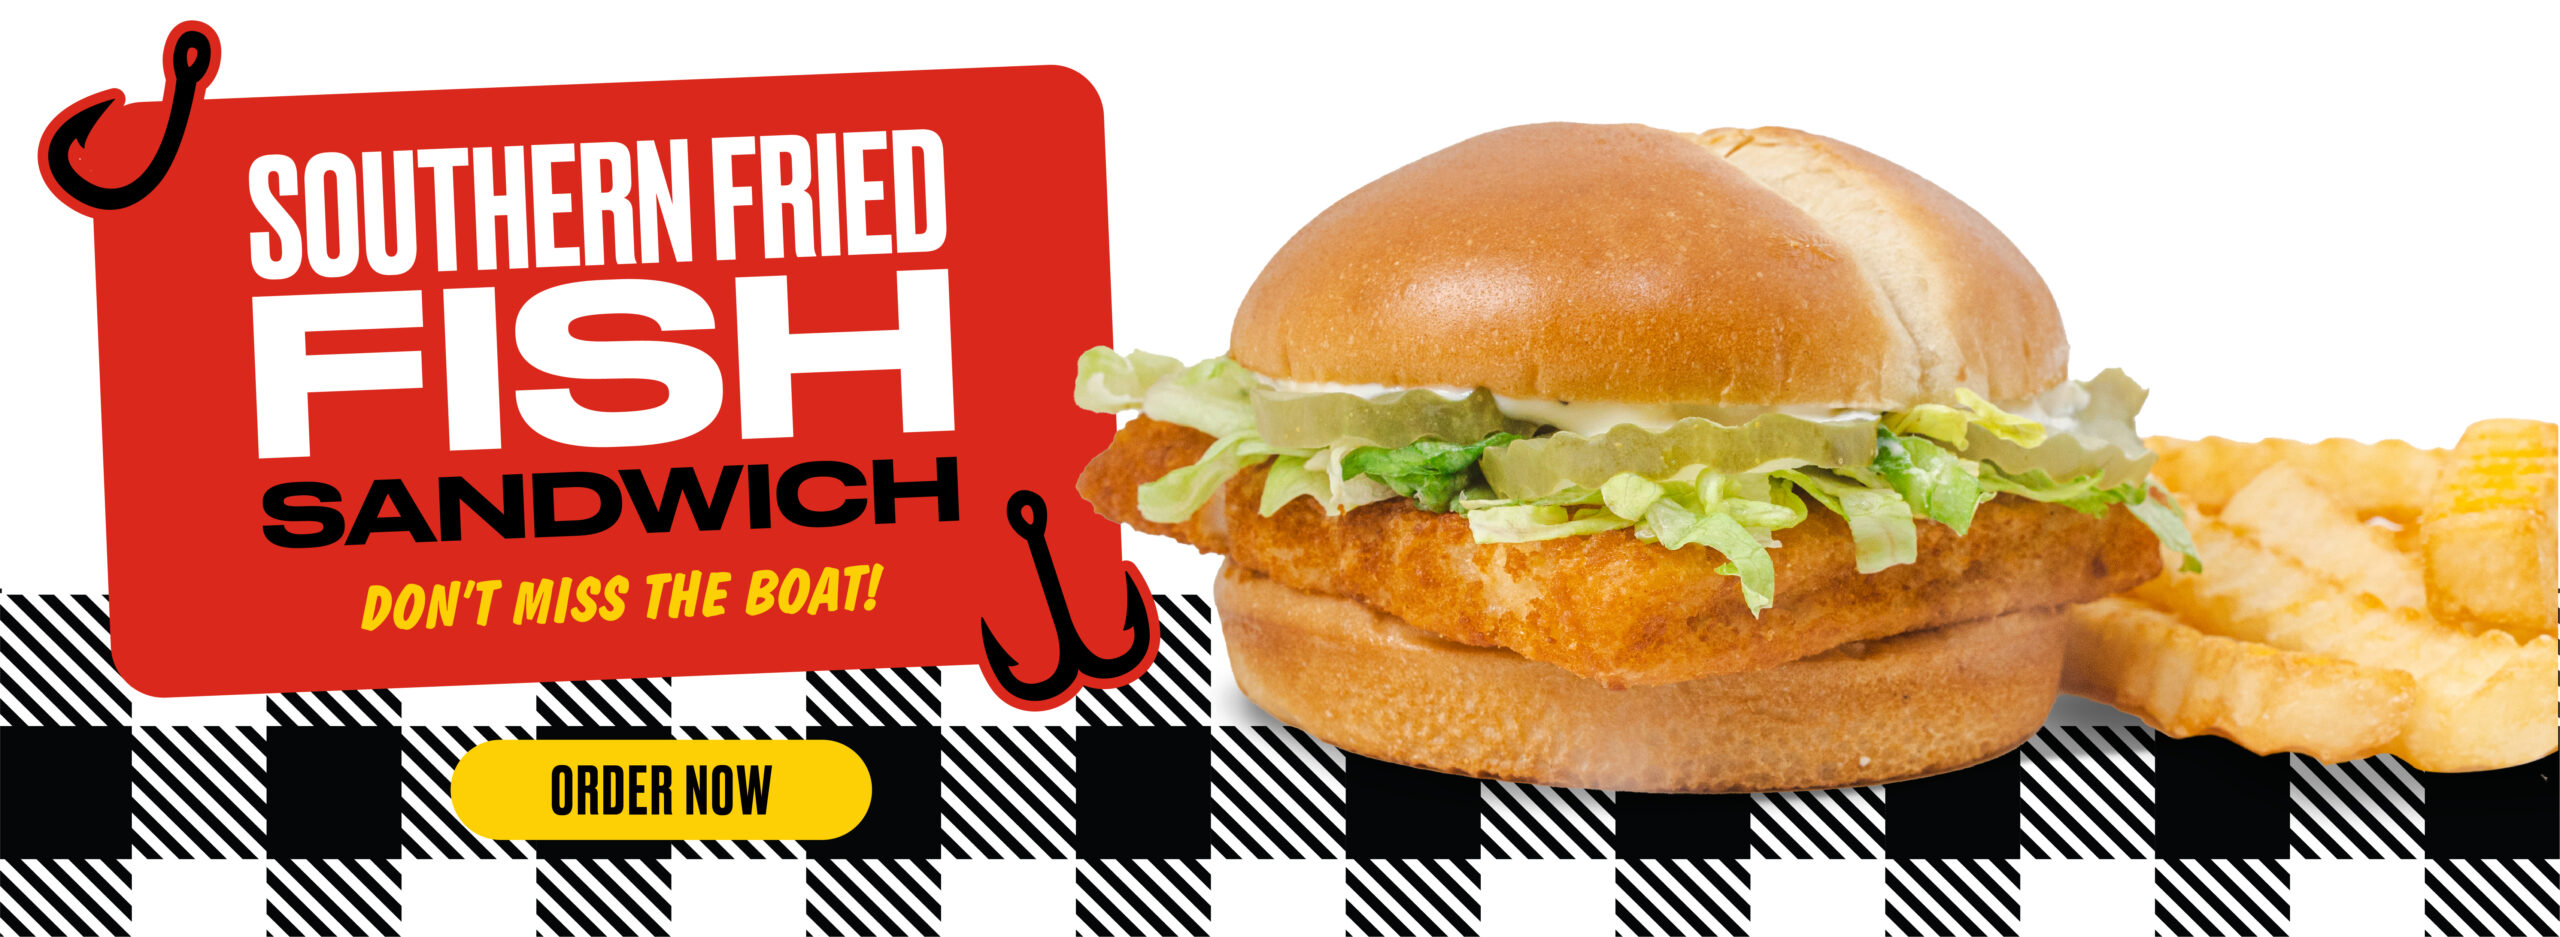 Eat at Jack's fish sandwich special